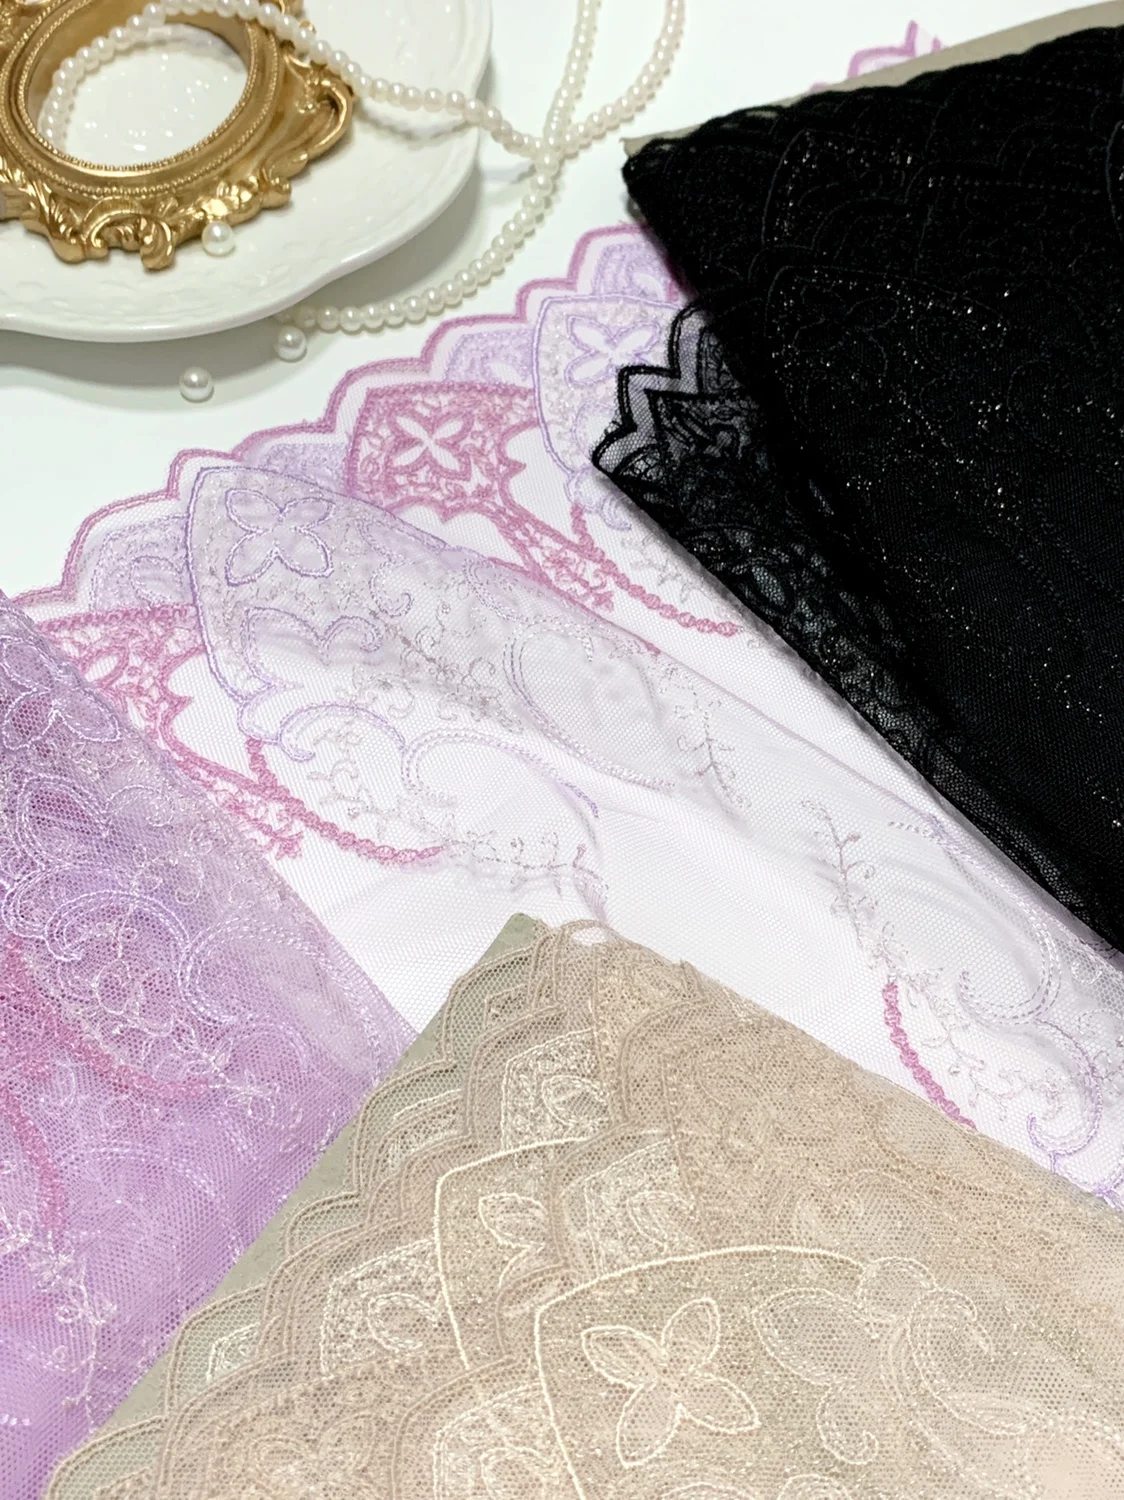 

13Meters Bilateral Embroidered Lace Trim Black Clothes Accessoriesy Lingerie Bra Underwear Doll's Dress Sewing DIY 13Yar